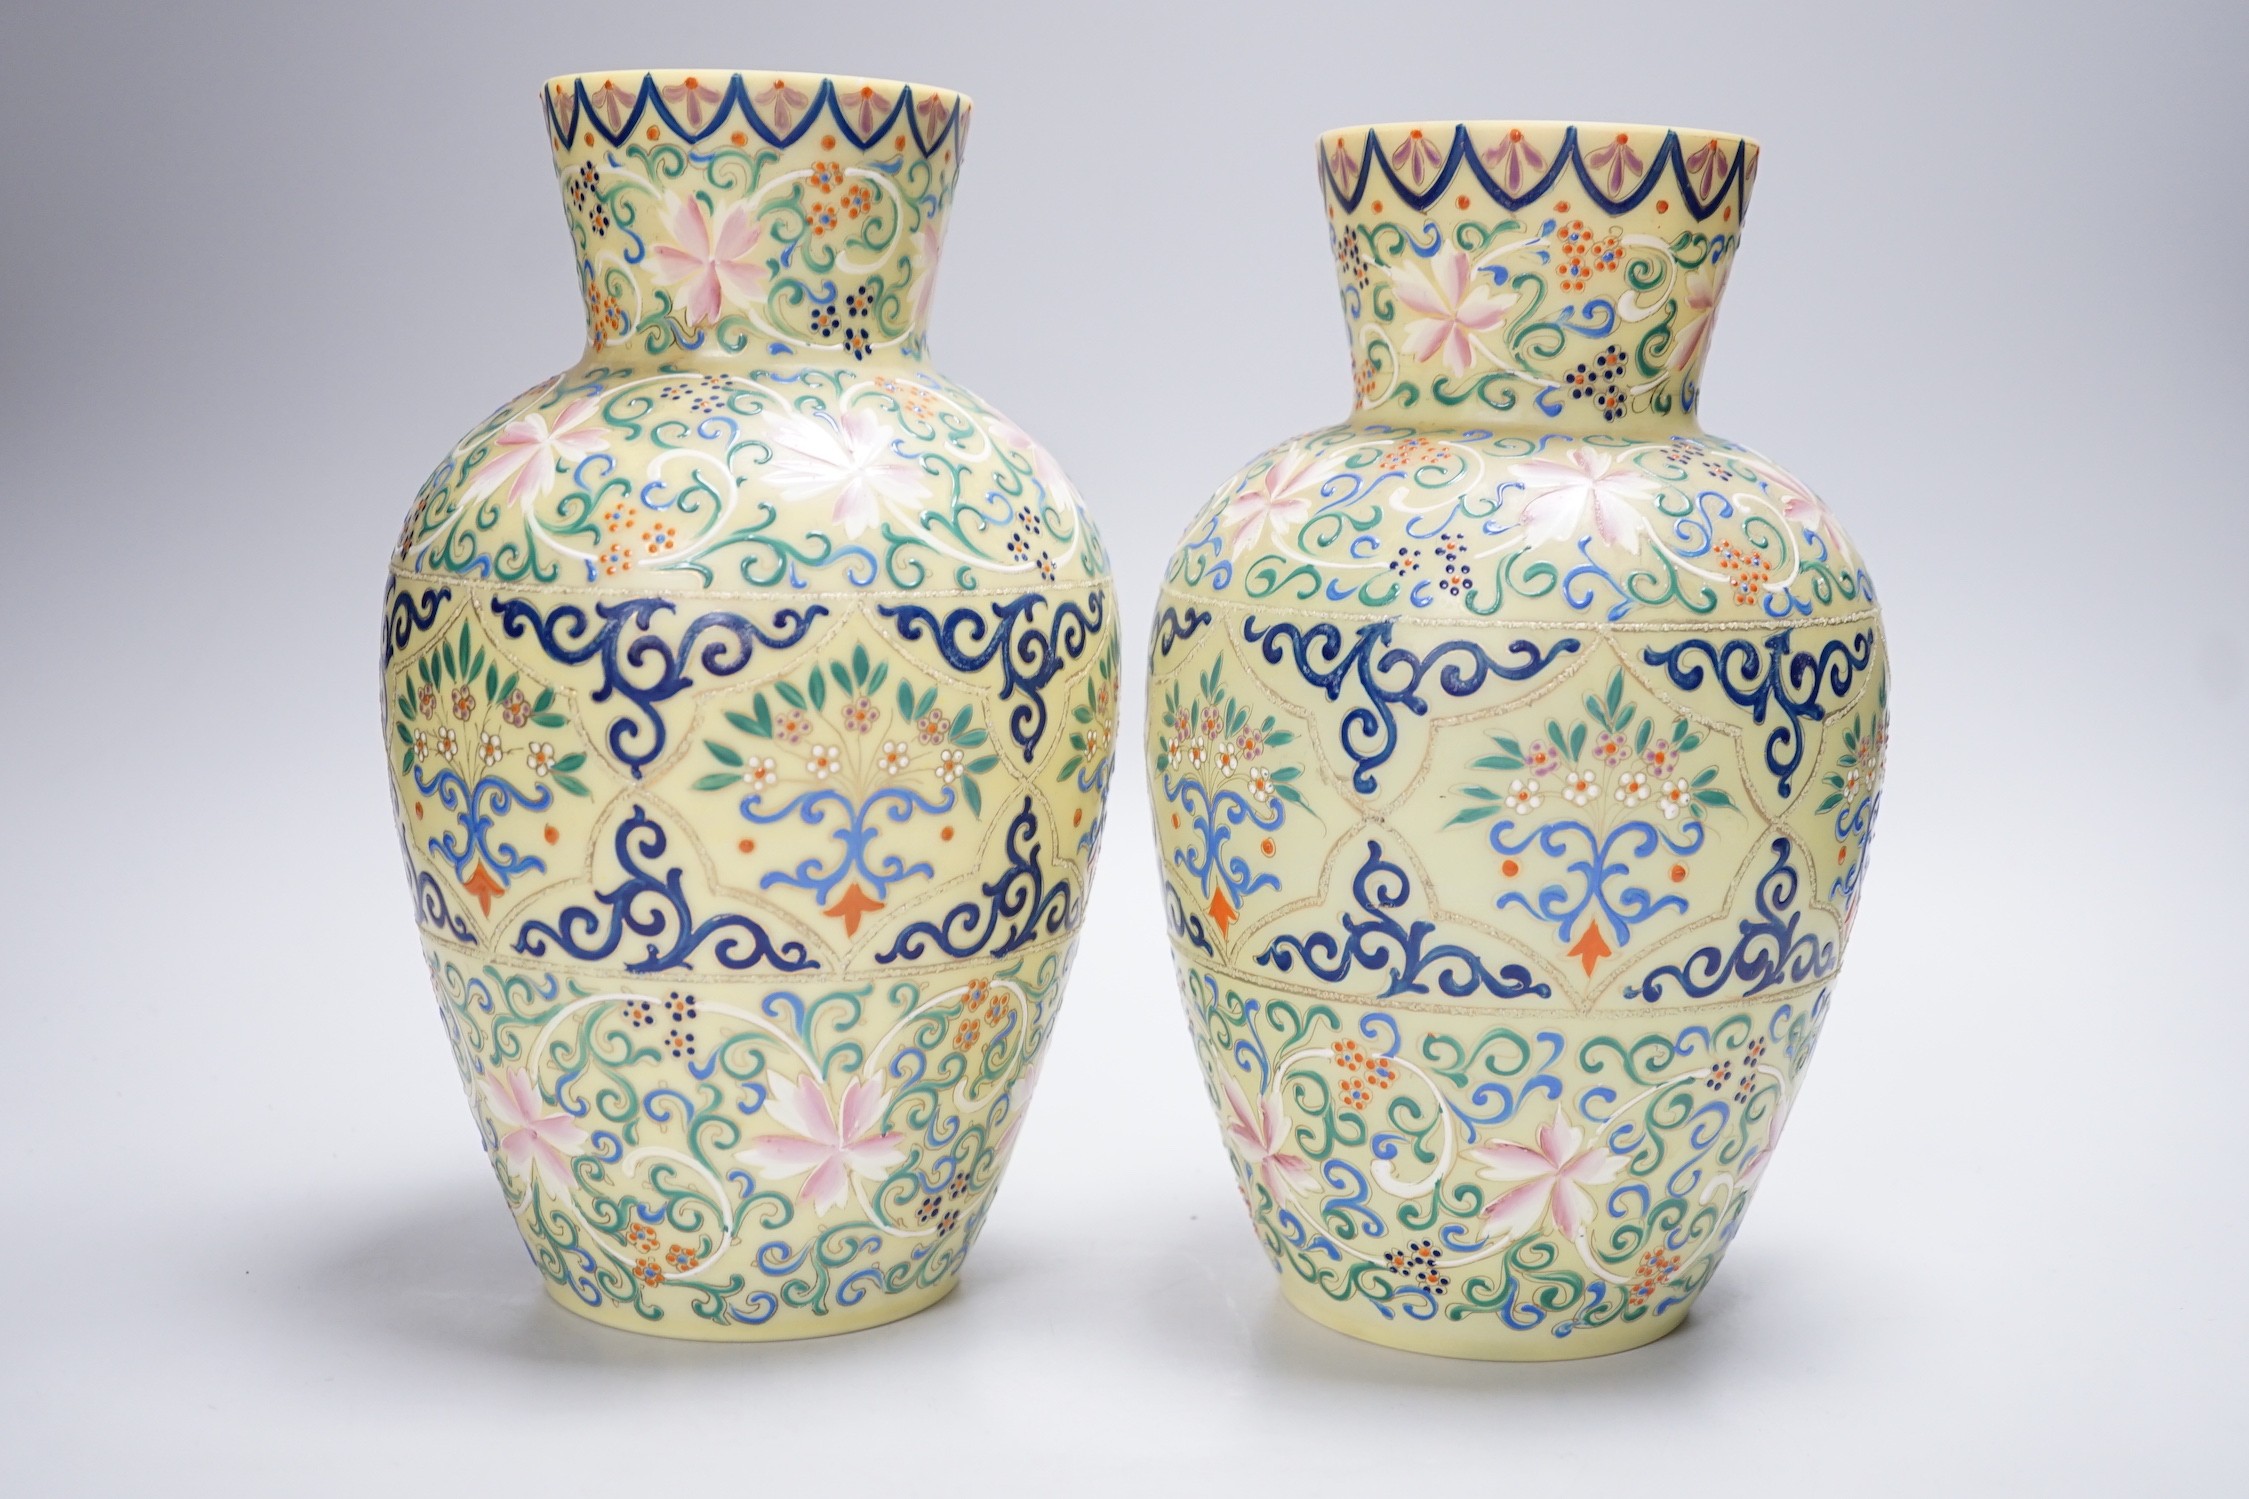 A pair of French enamelled glass vases, Persian inspired, 25.5cm